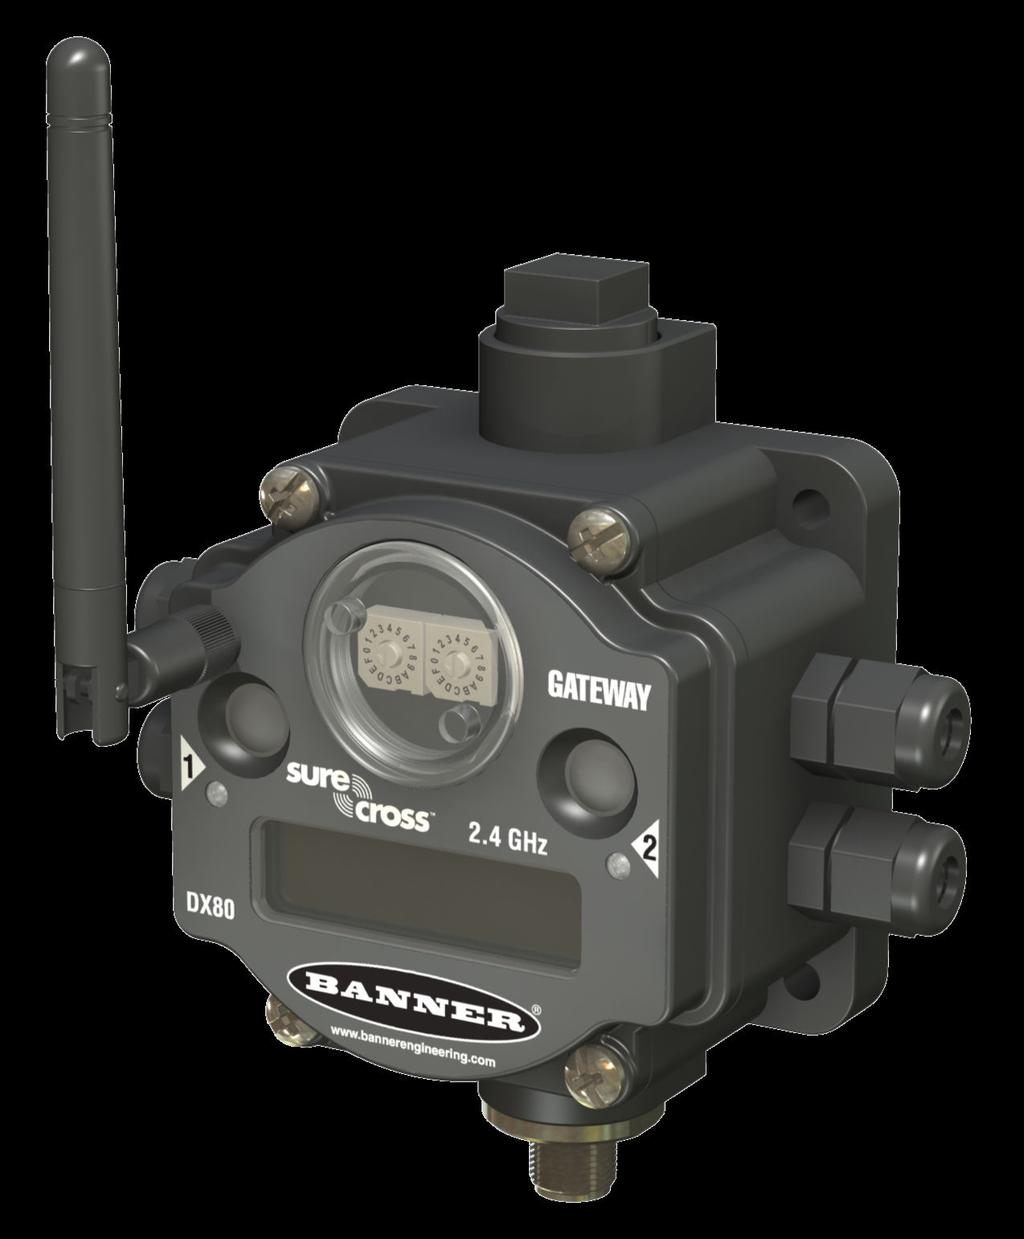 SureCross DX80 for Wireless Q45 Sensors A acts as the master device within each radio network, initiates communication and reporting with the Nodes, and controls the timing for the entire network.